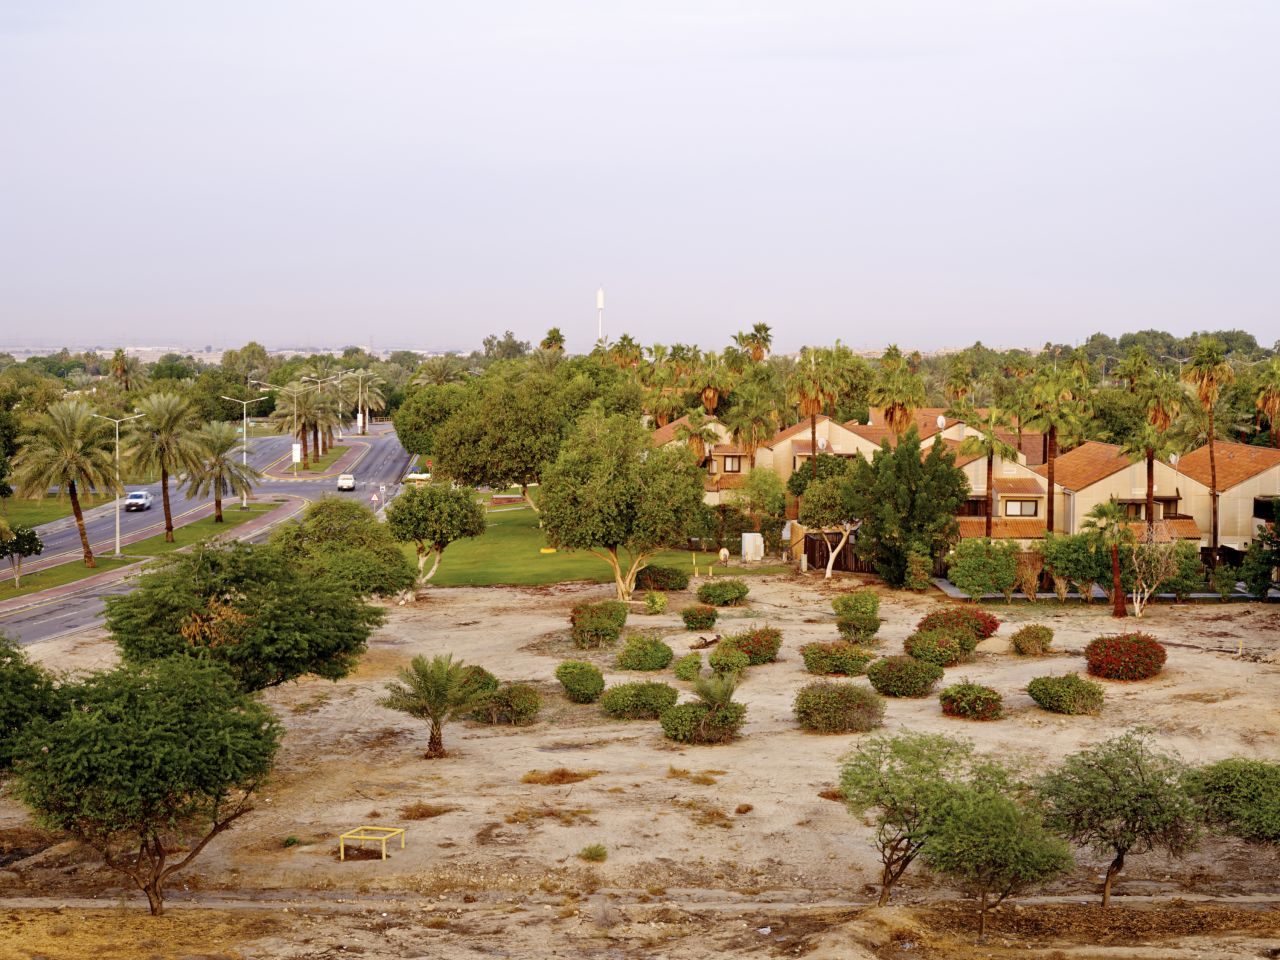 This gated community is an intentional replica of a California settlement.